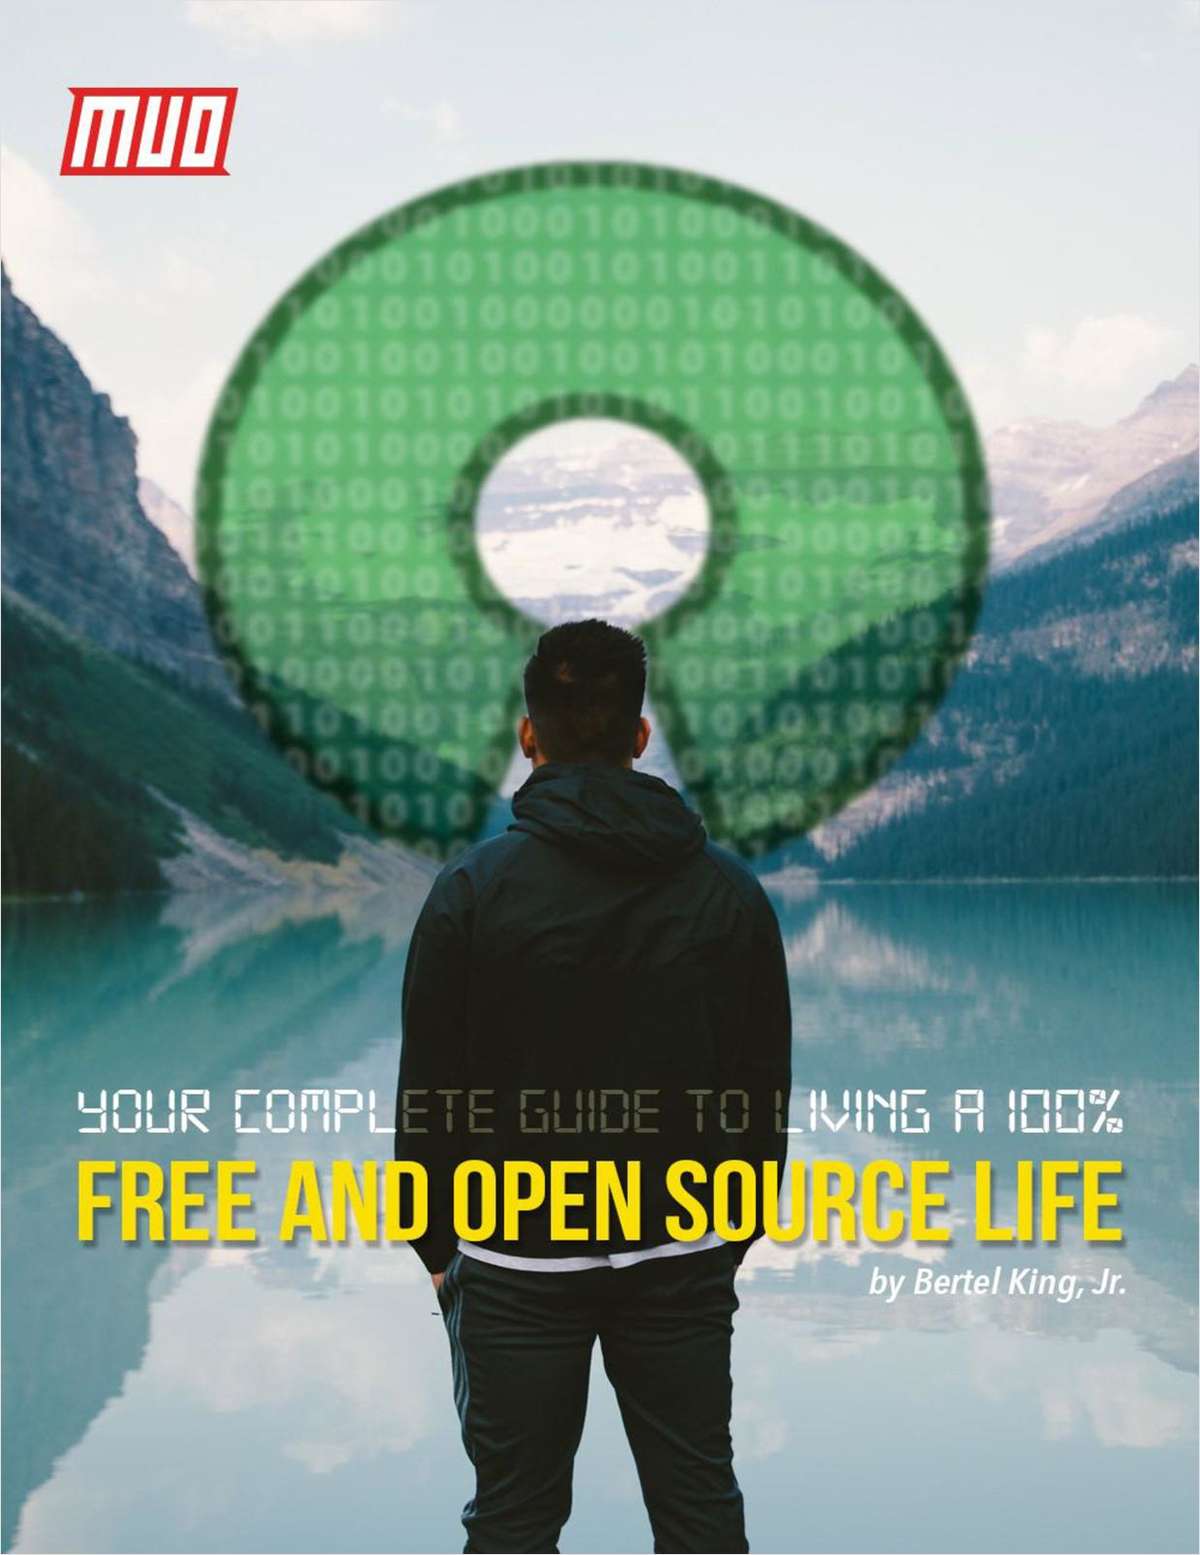 Your Complete Guide to Living a 100% Free and Open Source Life